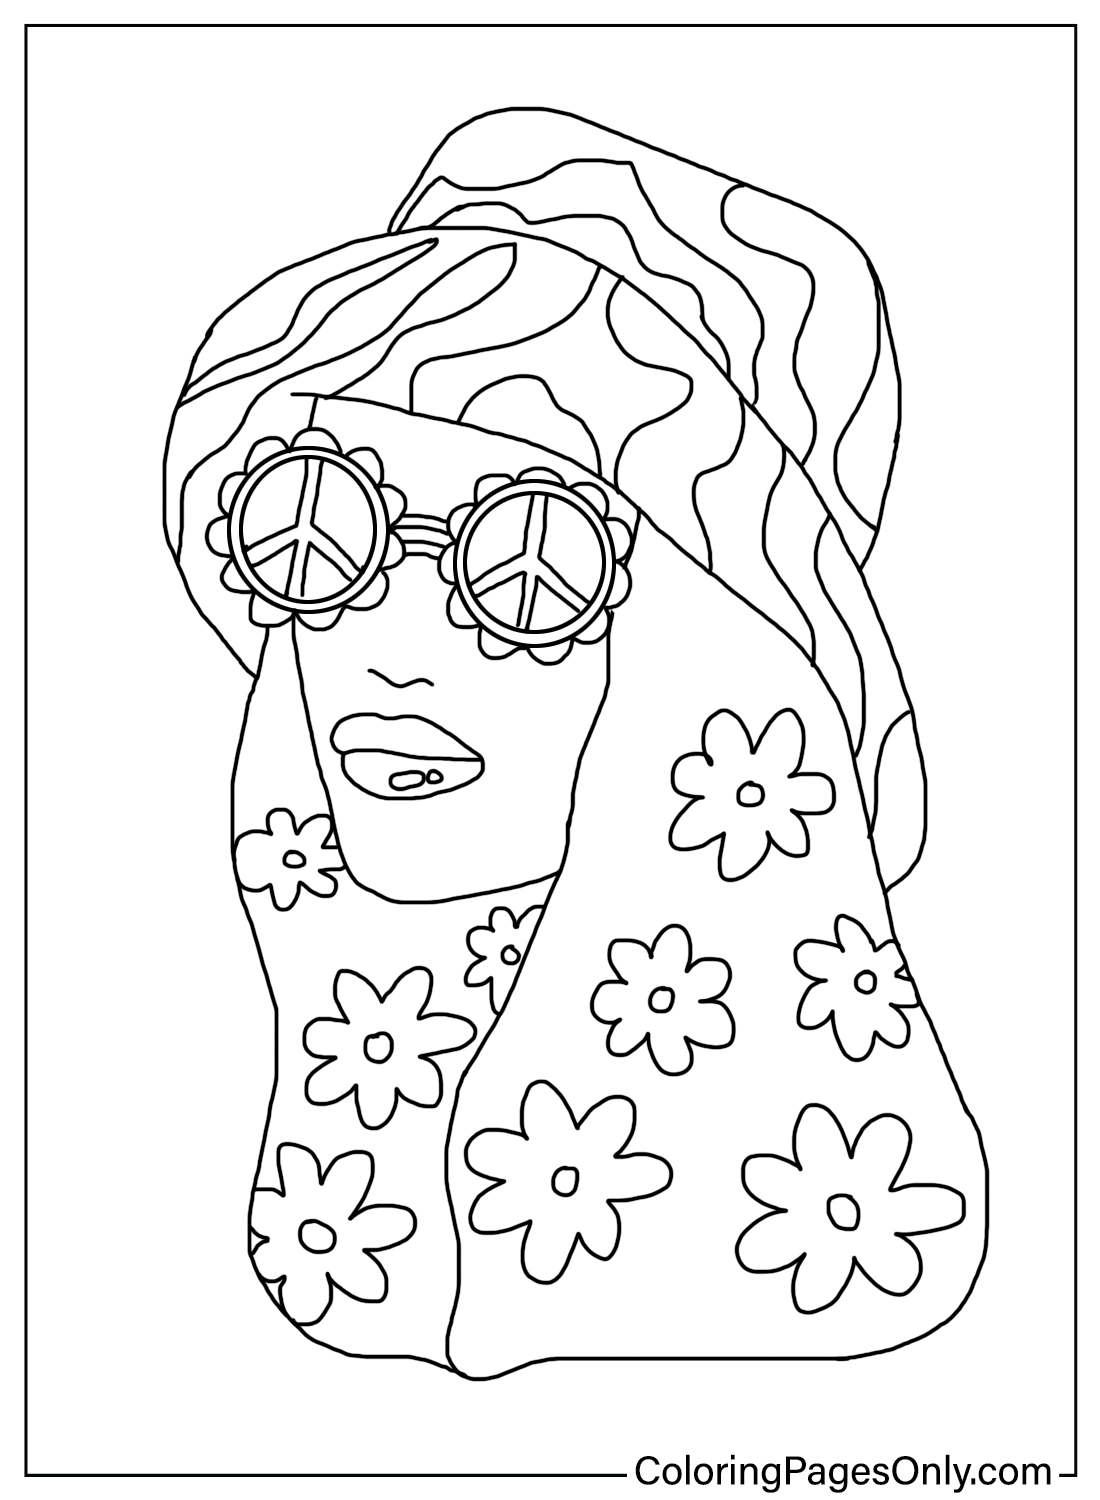 Hippie Girl Coloring Page from Hippie